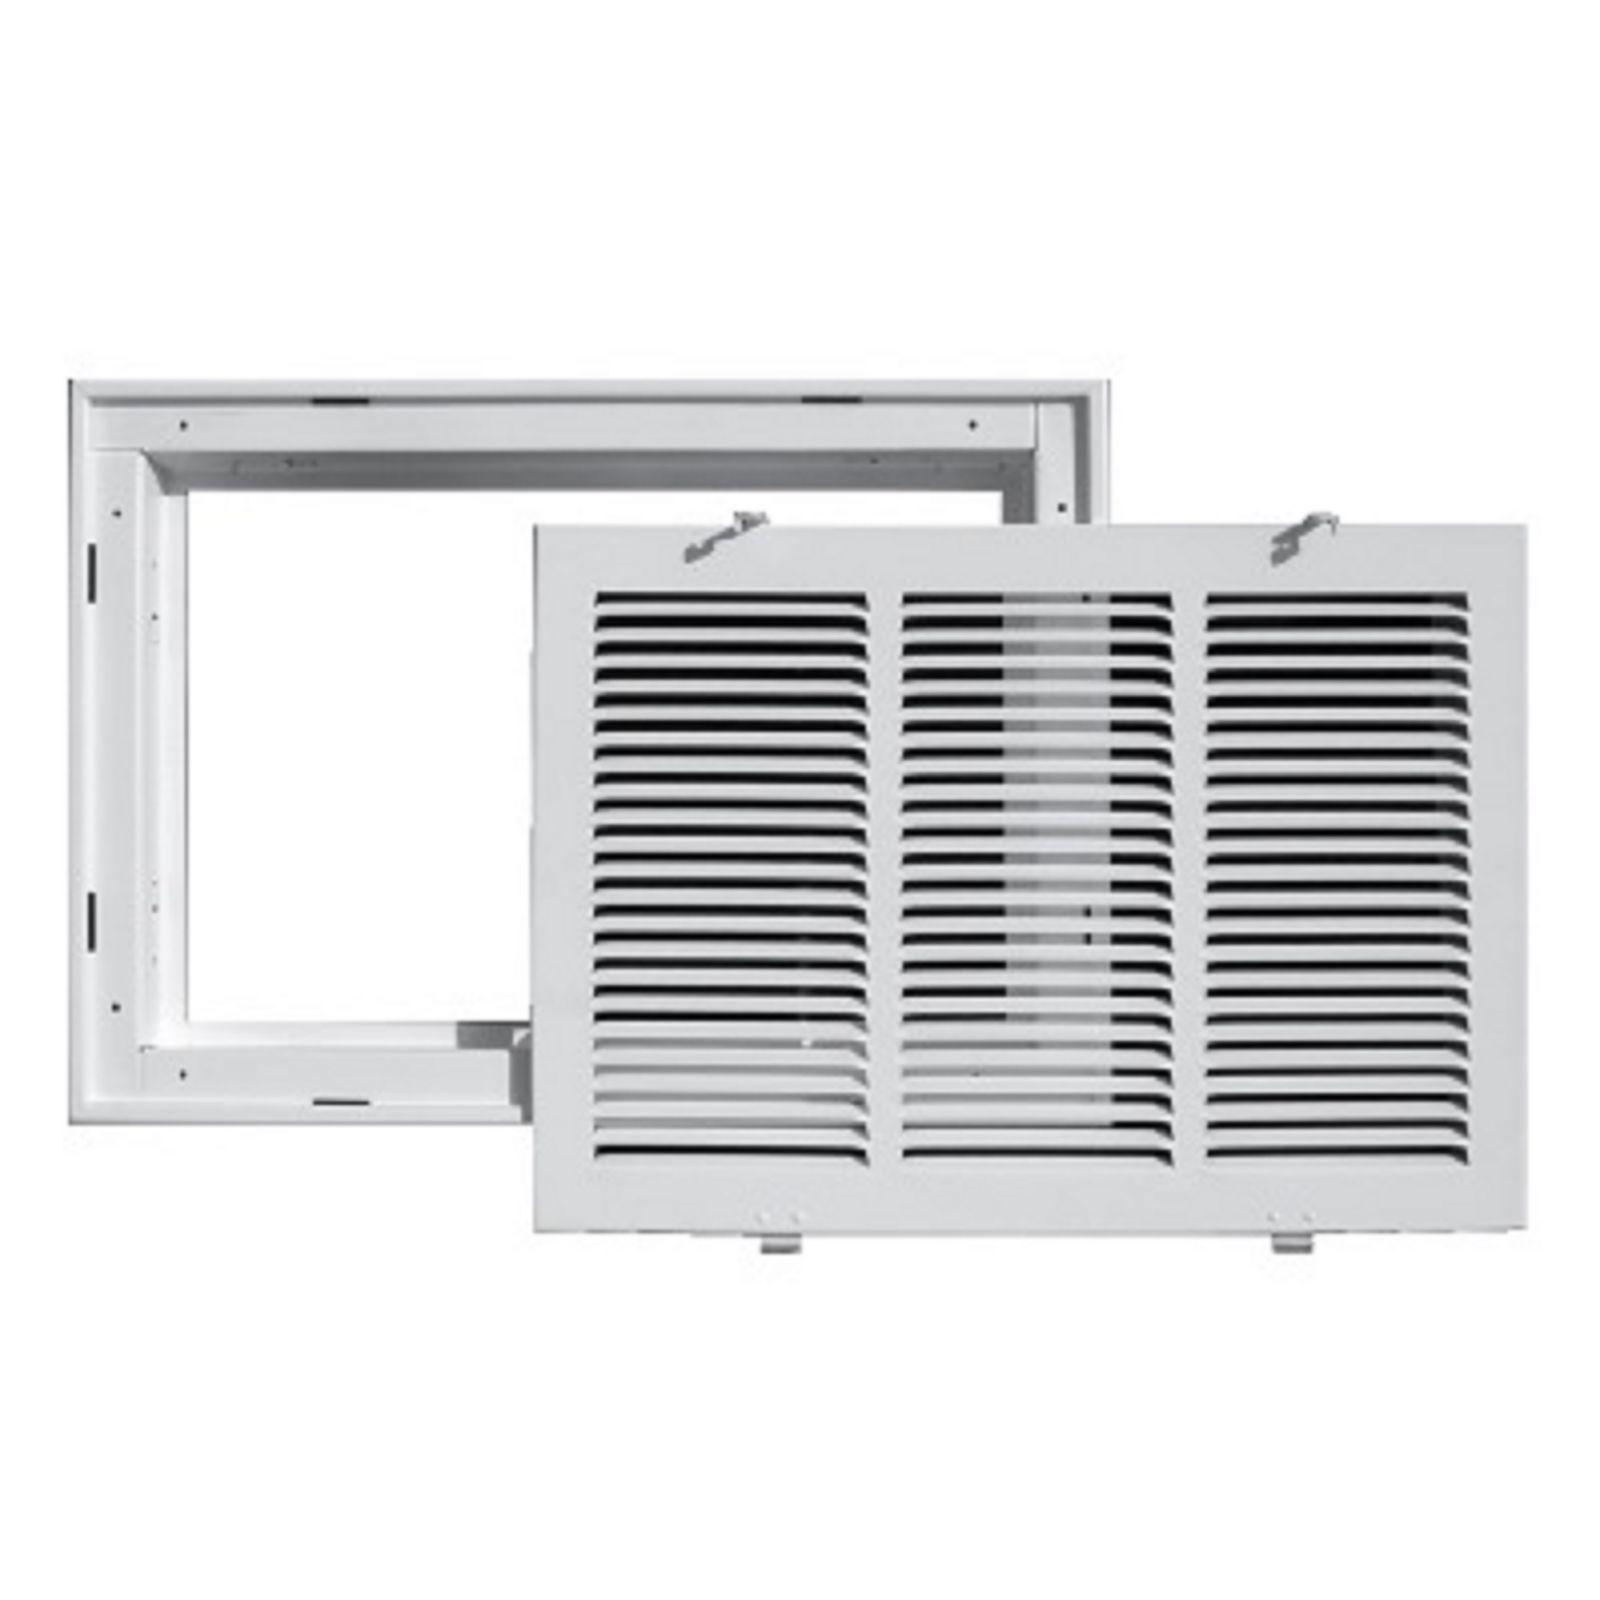 TRUaire 190RF 30X12 - Steel Return Air Filter Grille With Removable Face, White, 30" X 12"